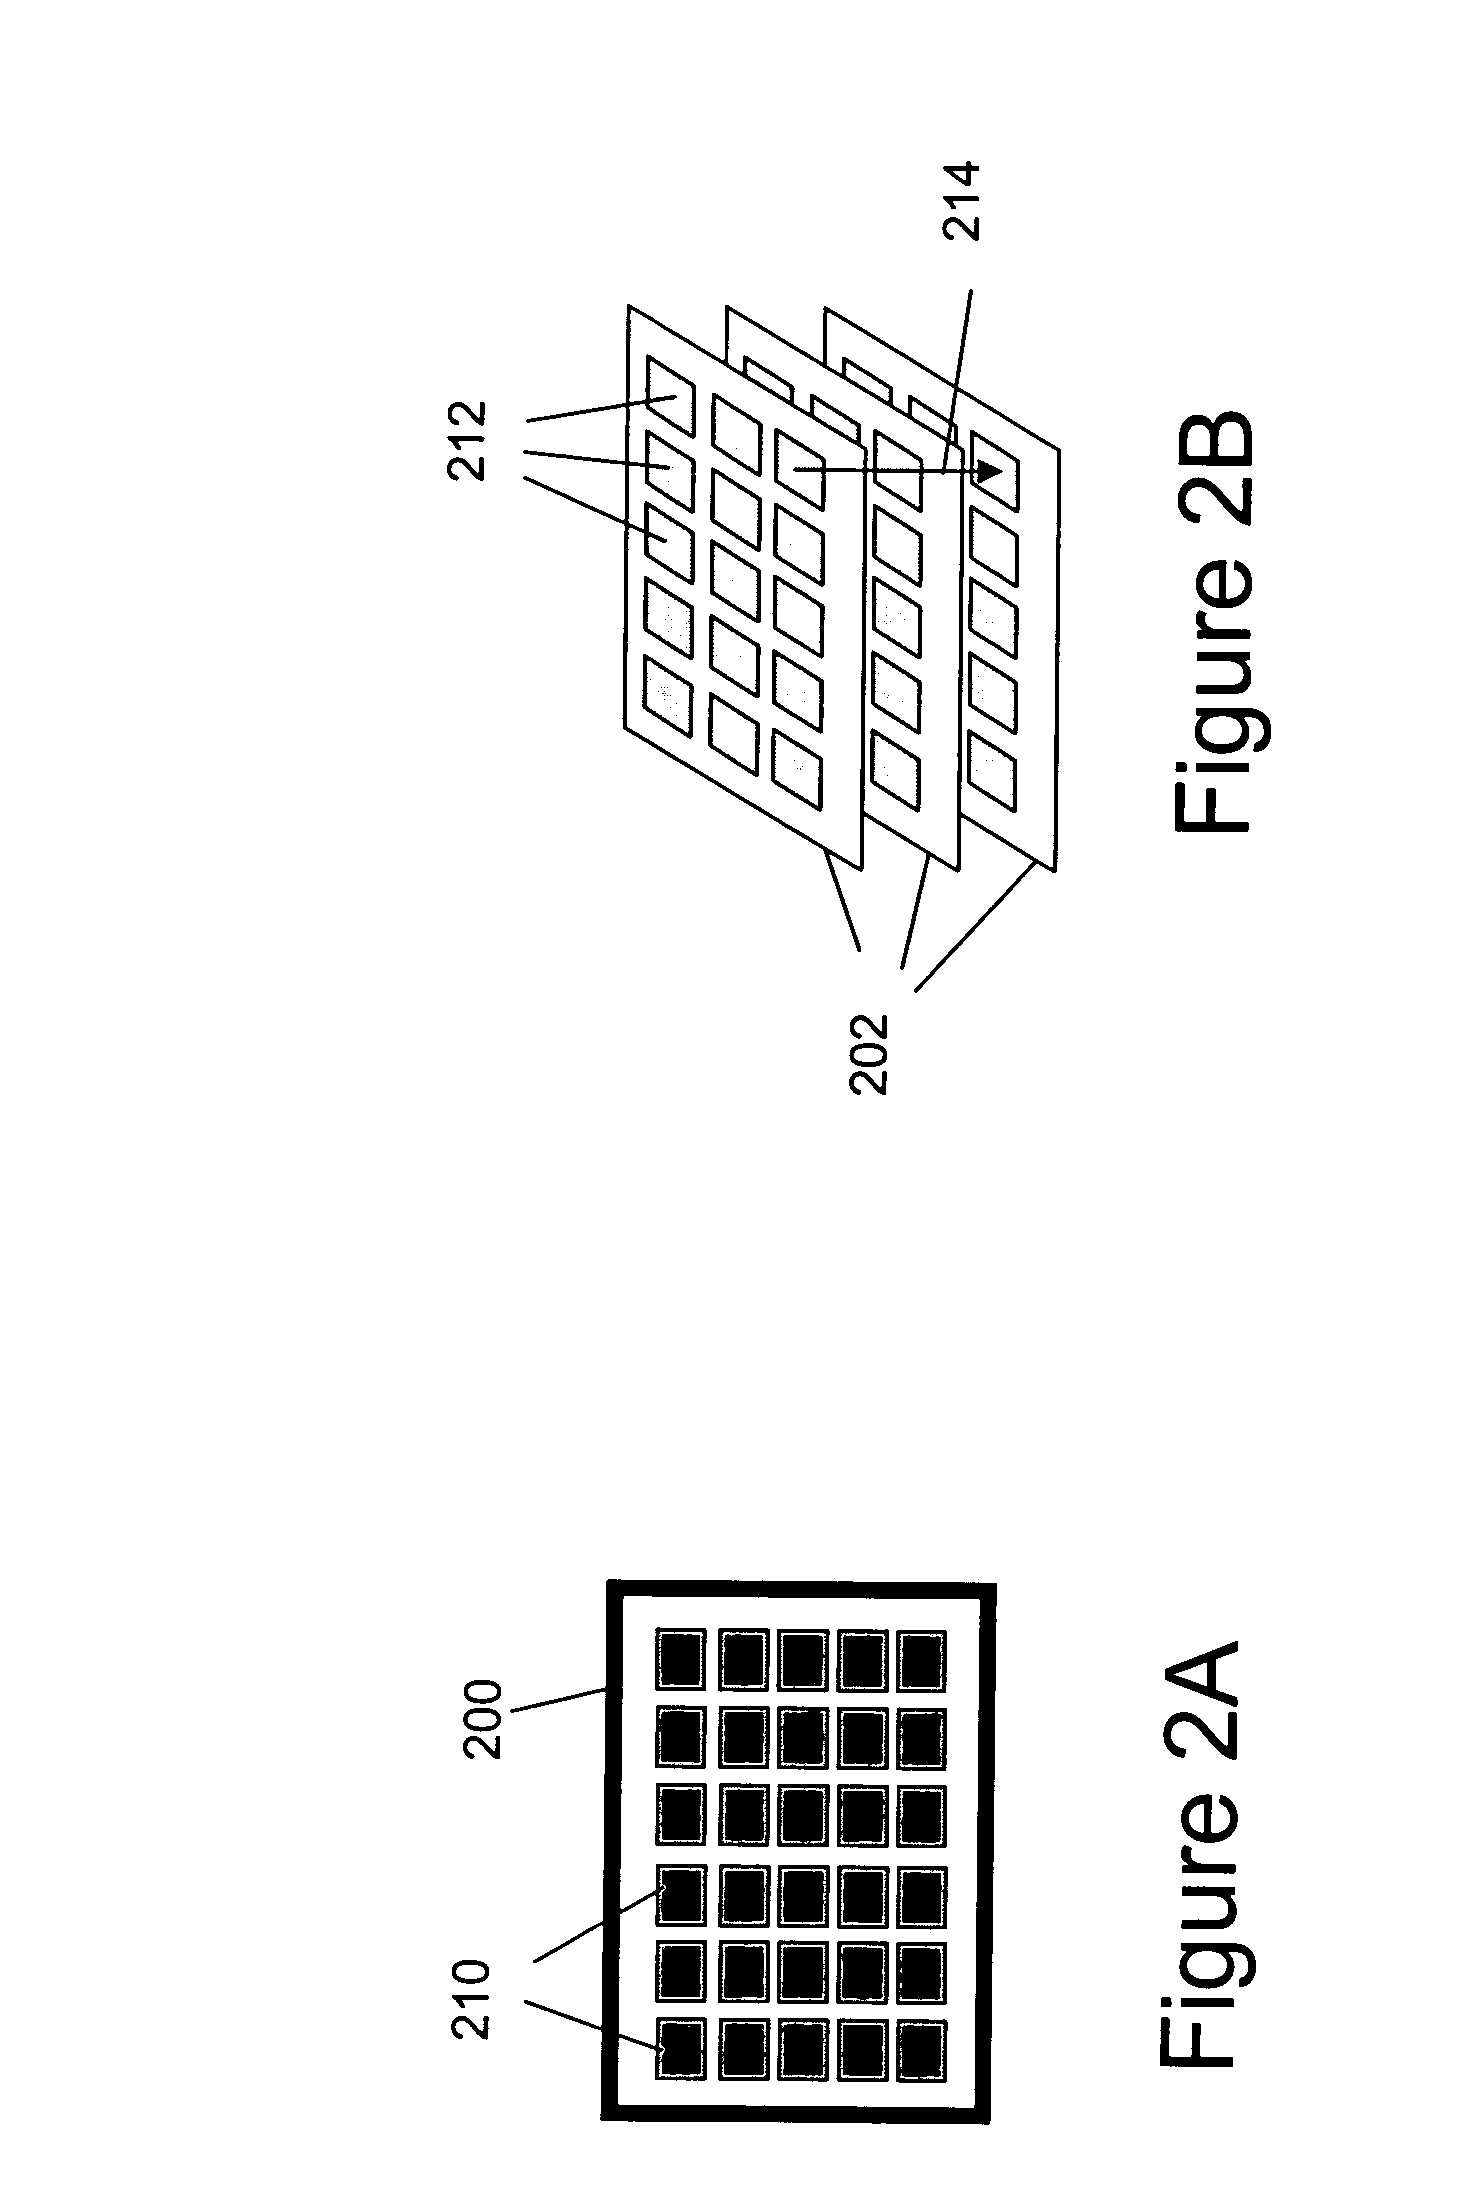 Methods for implementing page based holographic ROM recording and reading